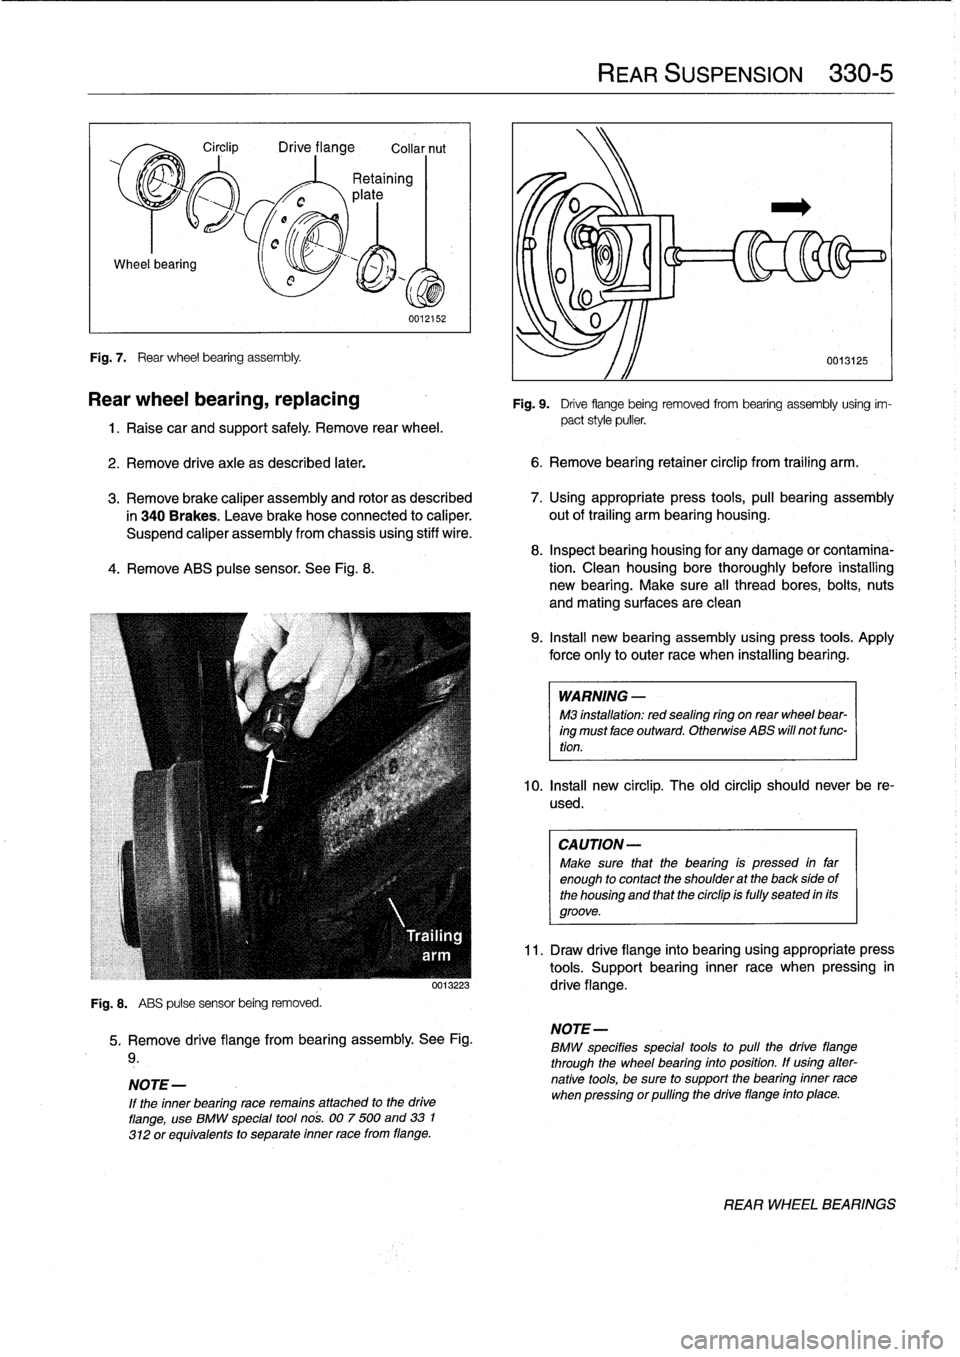 BMW 328i 1994 E36 User Guide Wheel
bearing

Fig
.
7
.

	

Rear
wheel
bearing
assembly
.

Circlip

	

Drive
flange

	

Collar
nut

0012152

Rear
wheel
bearing,
replacing

1
.
Raise
car
and
support
safely
.
Remove
rear
wheel
.

2
.